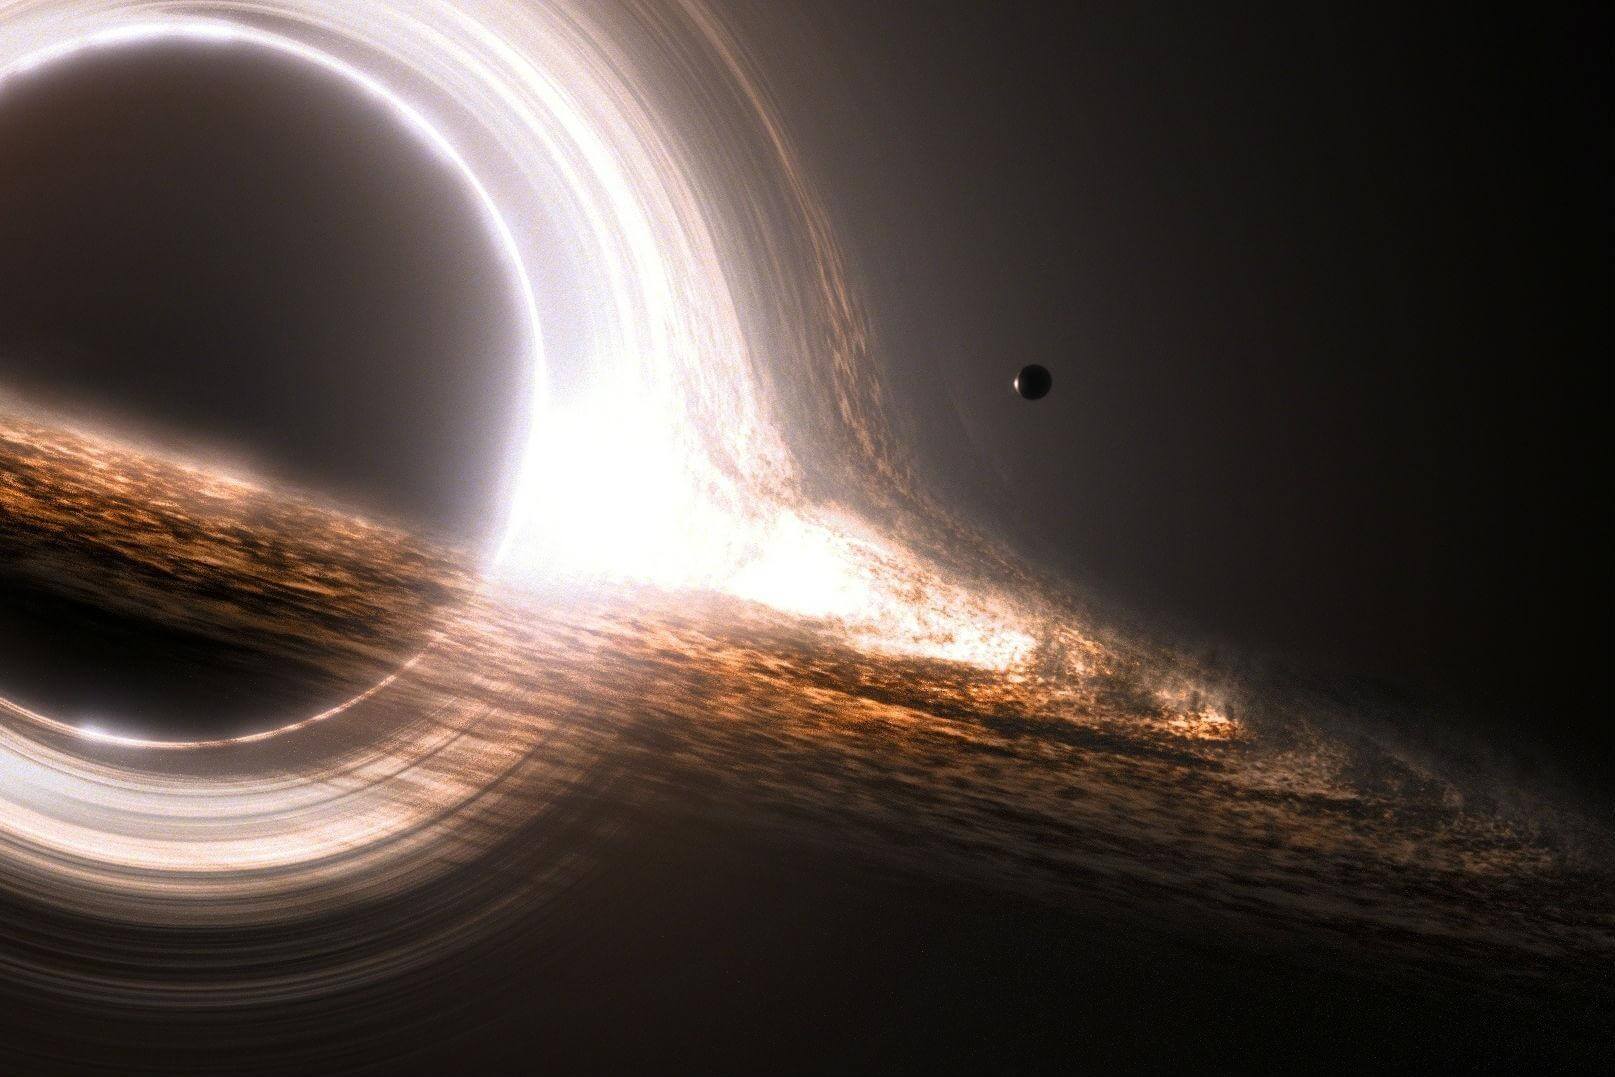 The world could get its first real glimpse of a black hole on April 10